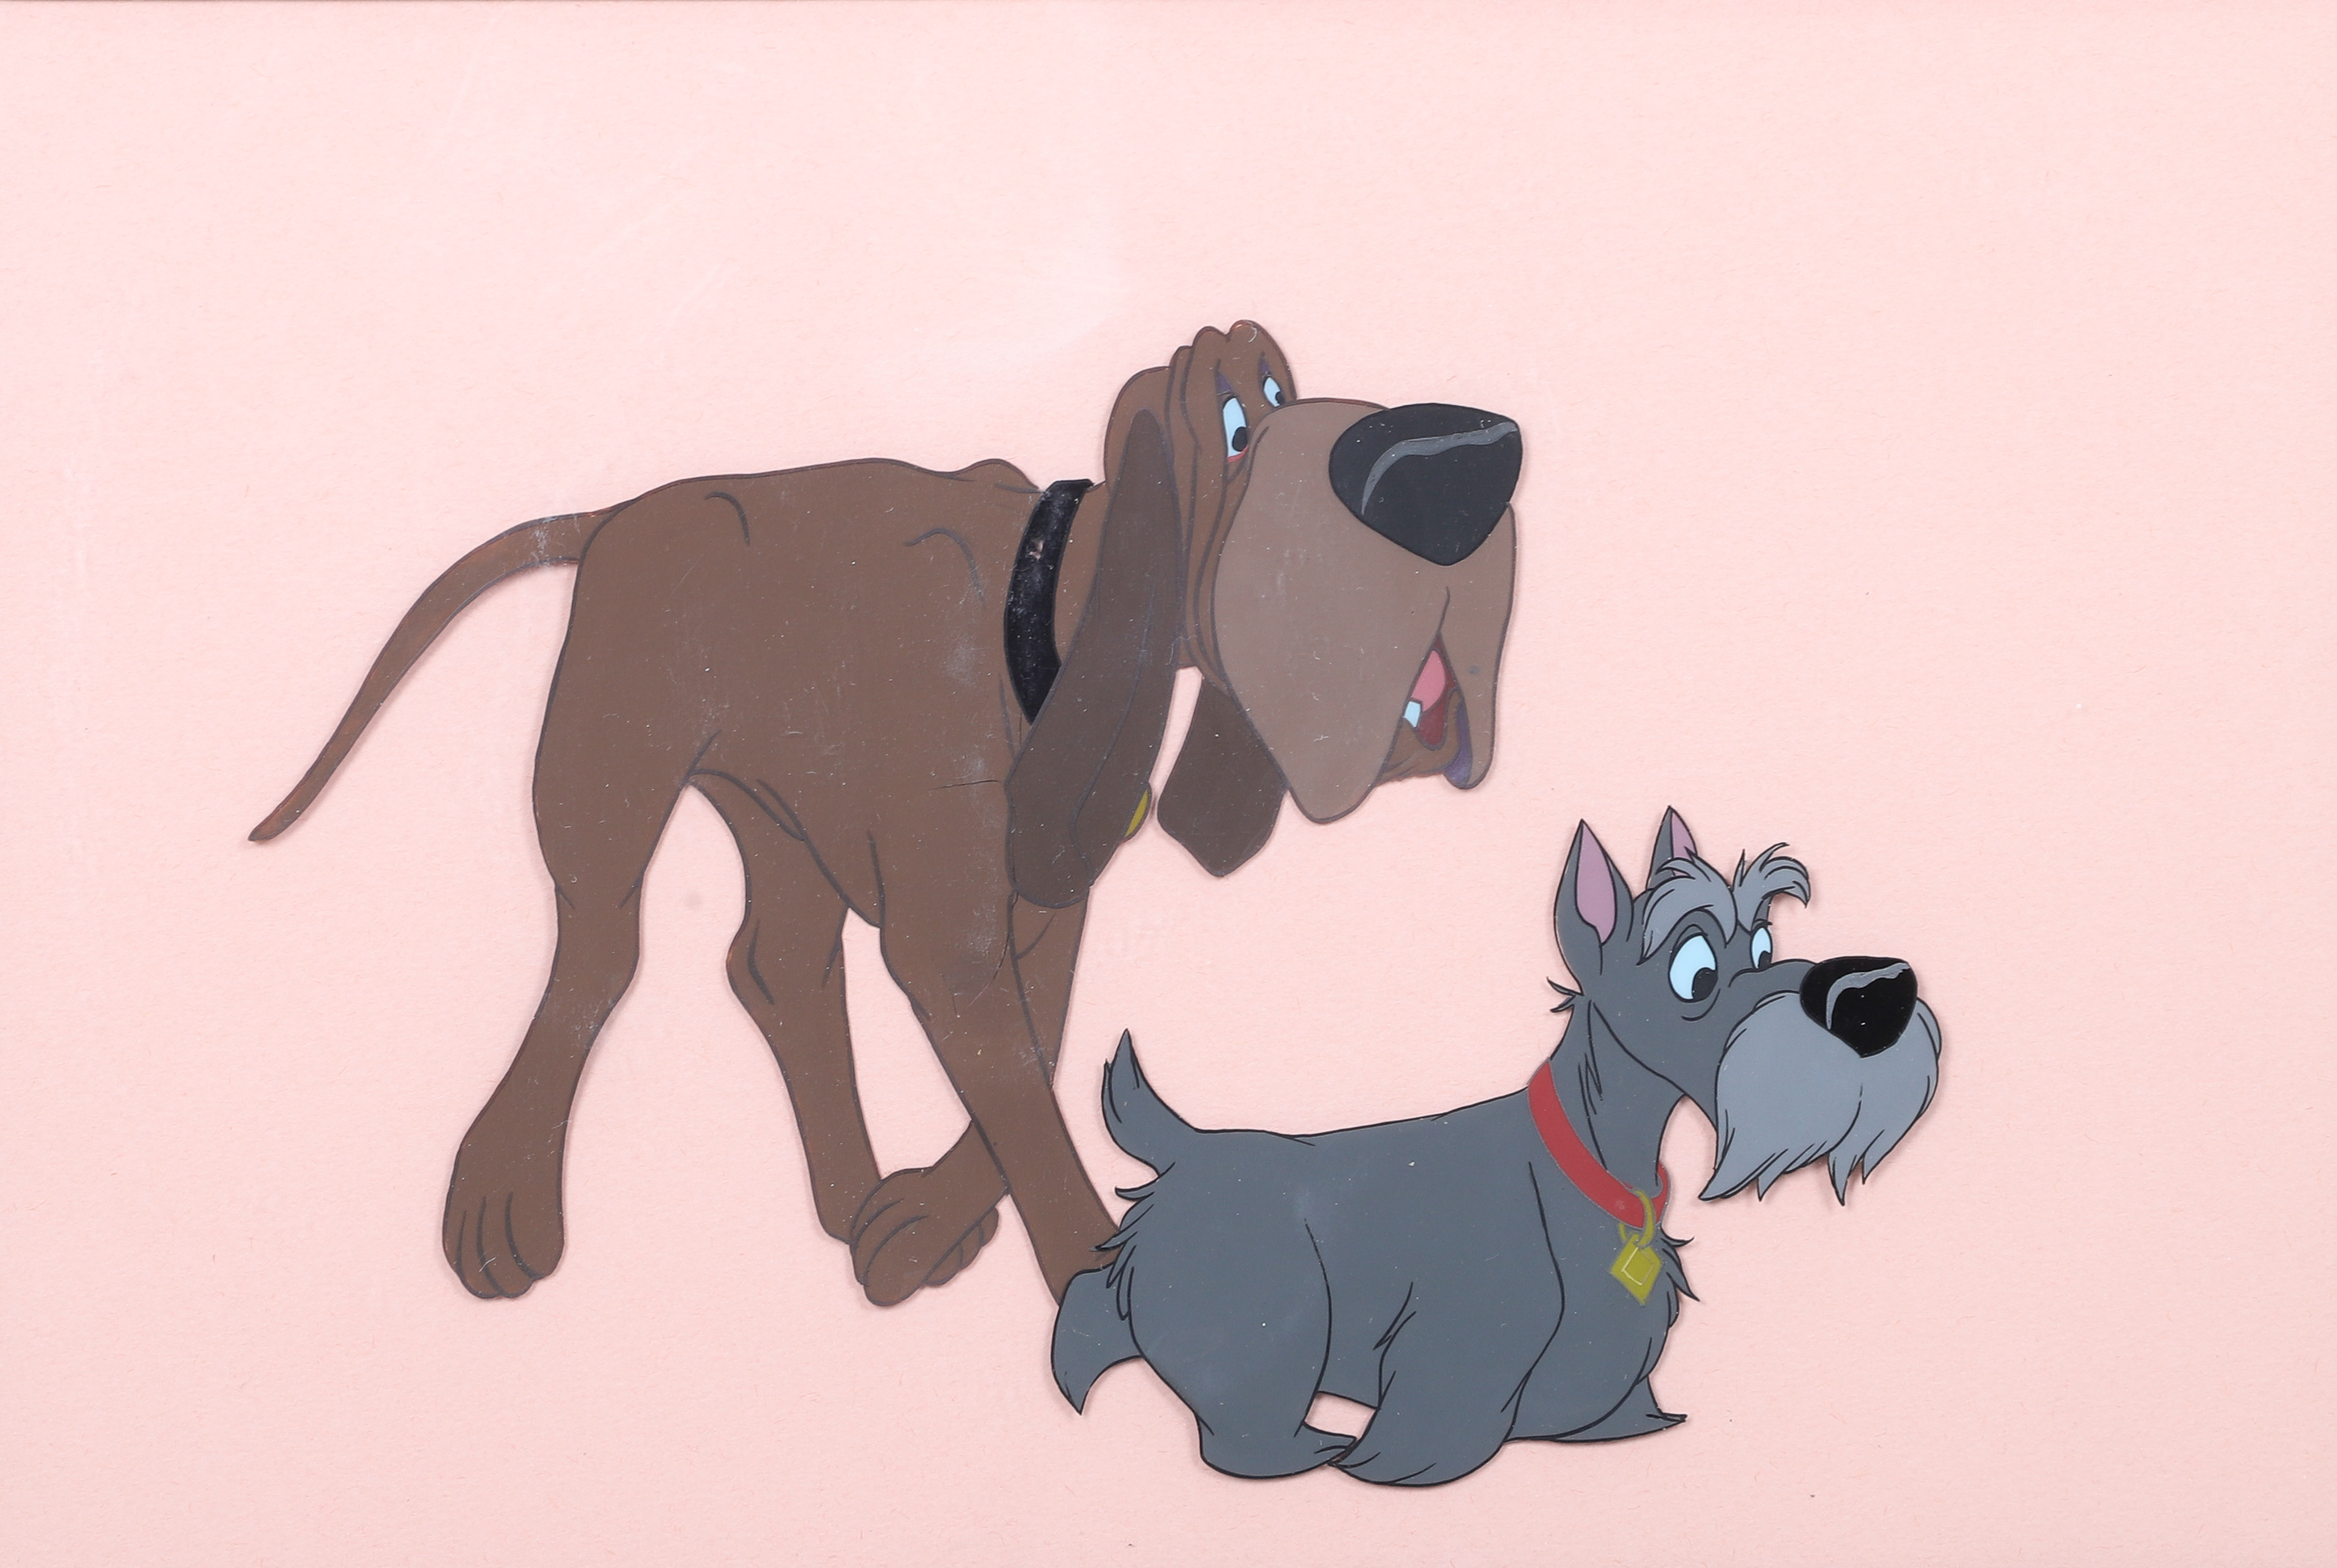 Lady and the Tramp production cel 2e1ca7